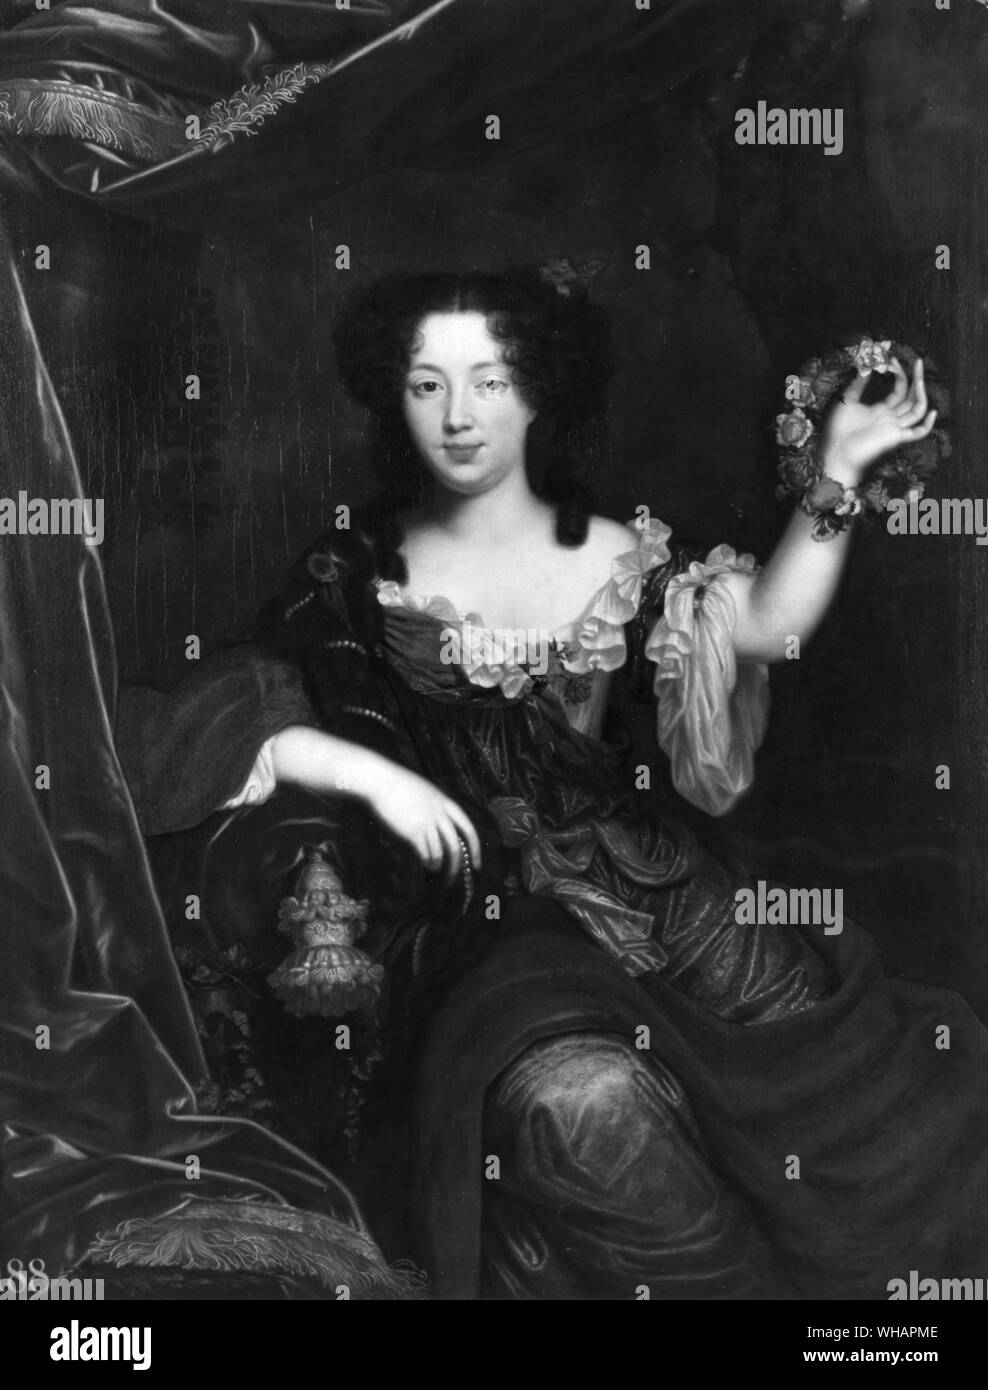 Louise Renee de Penancoet De Keroualle Duchess of Portsmouth and Aubigny 1649-1743. Probably by Vignon. Daughter of the Sieur de Keroualle, of a very old Breton family, appointed 1668 Maid of Honour to Henrietta, Duchess of Orleans whom she accompanied to England in 1670; she was later sent back by Louis XIV to enthral Charles II and she became his mistress in 1671. She bore the king one sone, Charles, Duke of Richmond, and was the heart of the French interest and a lavish exponent of French taste at the English court until her departure for France in 1688 Stock Photo